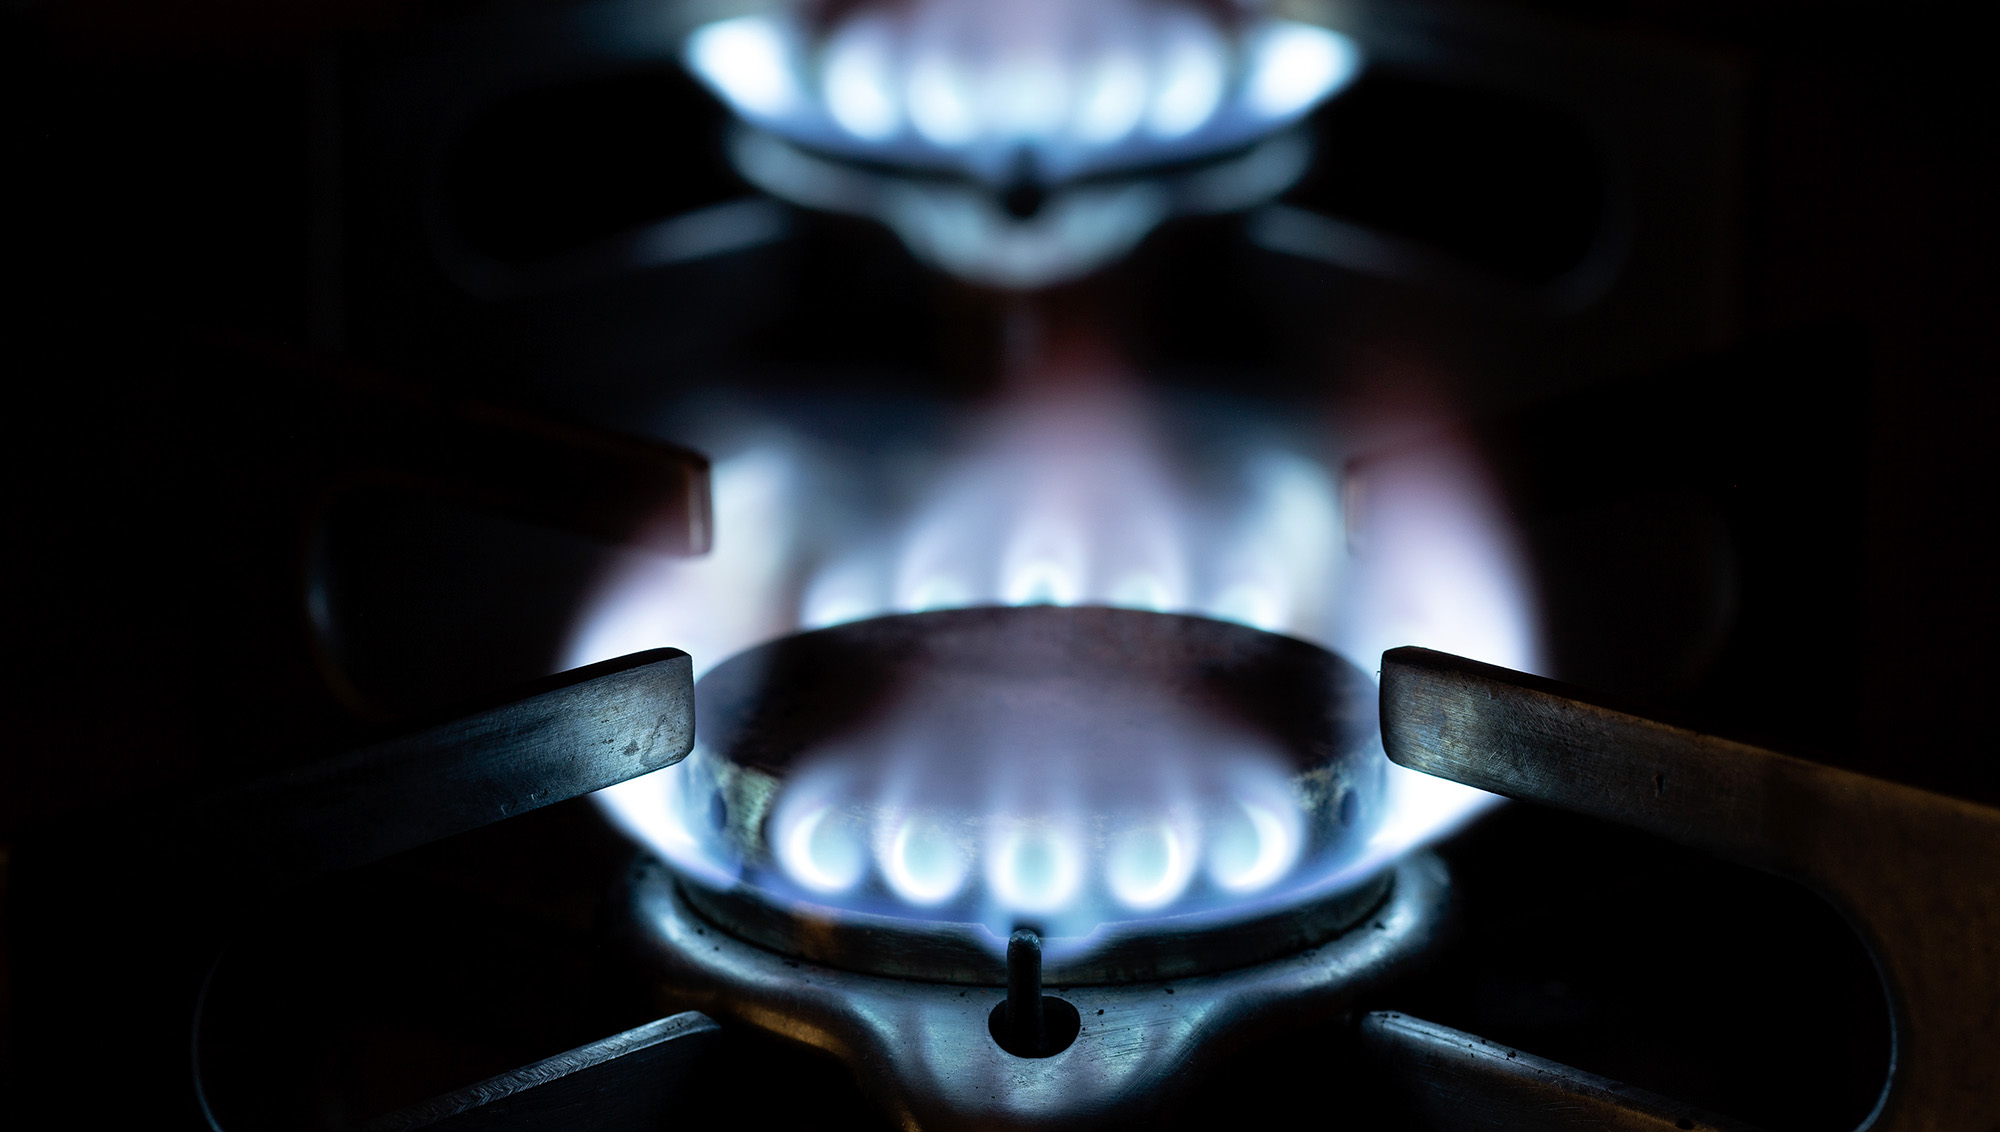 A gas stove ban could help climate and health problems. But